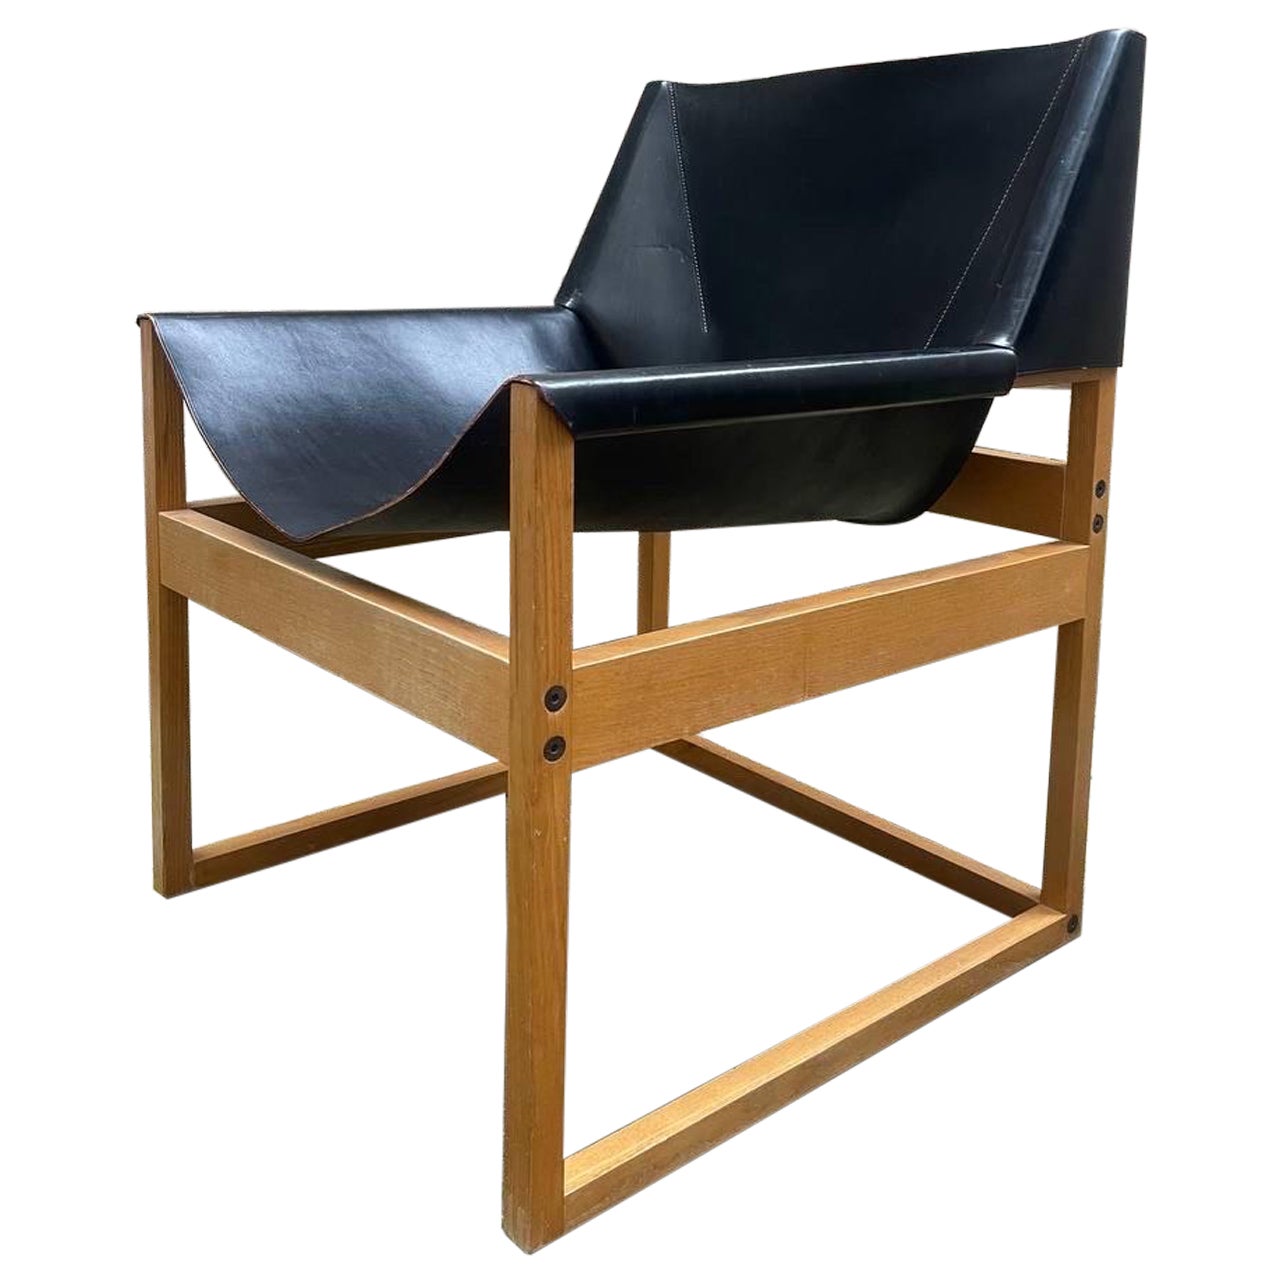 Canto Chair by Rainer Schell for Schlapp